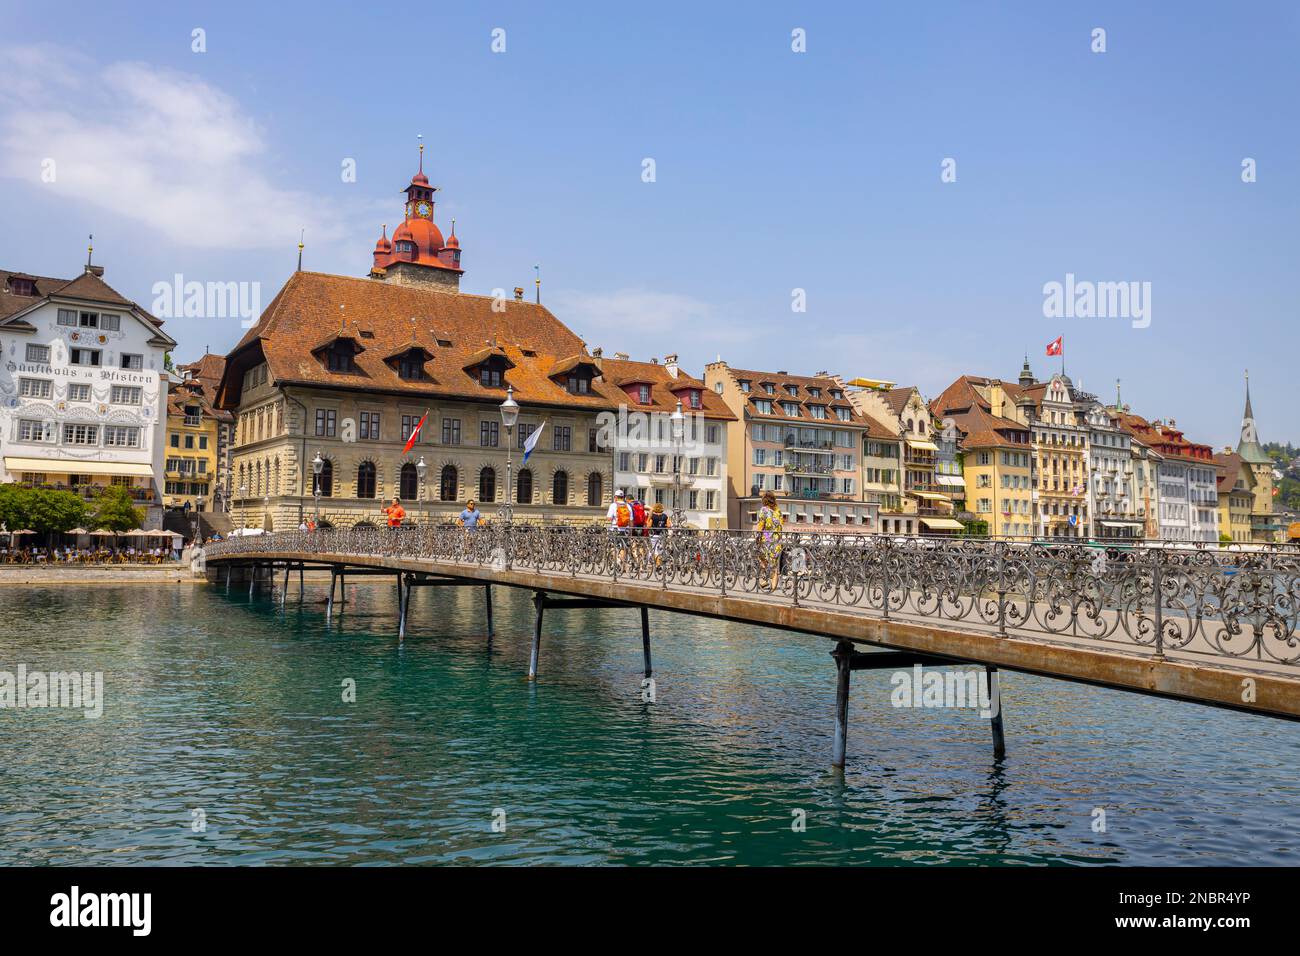 LUCERNE, SWITZERLAND, JUNE 21, 2022 - View of Rathaussteg bridge and the City Hall (Rathaus) in the center city of Lucerne, Switzerland Stock Photo